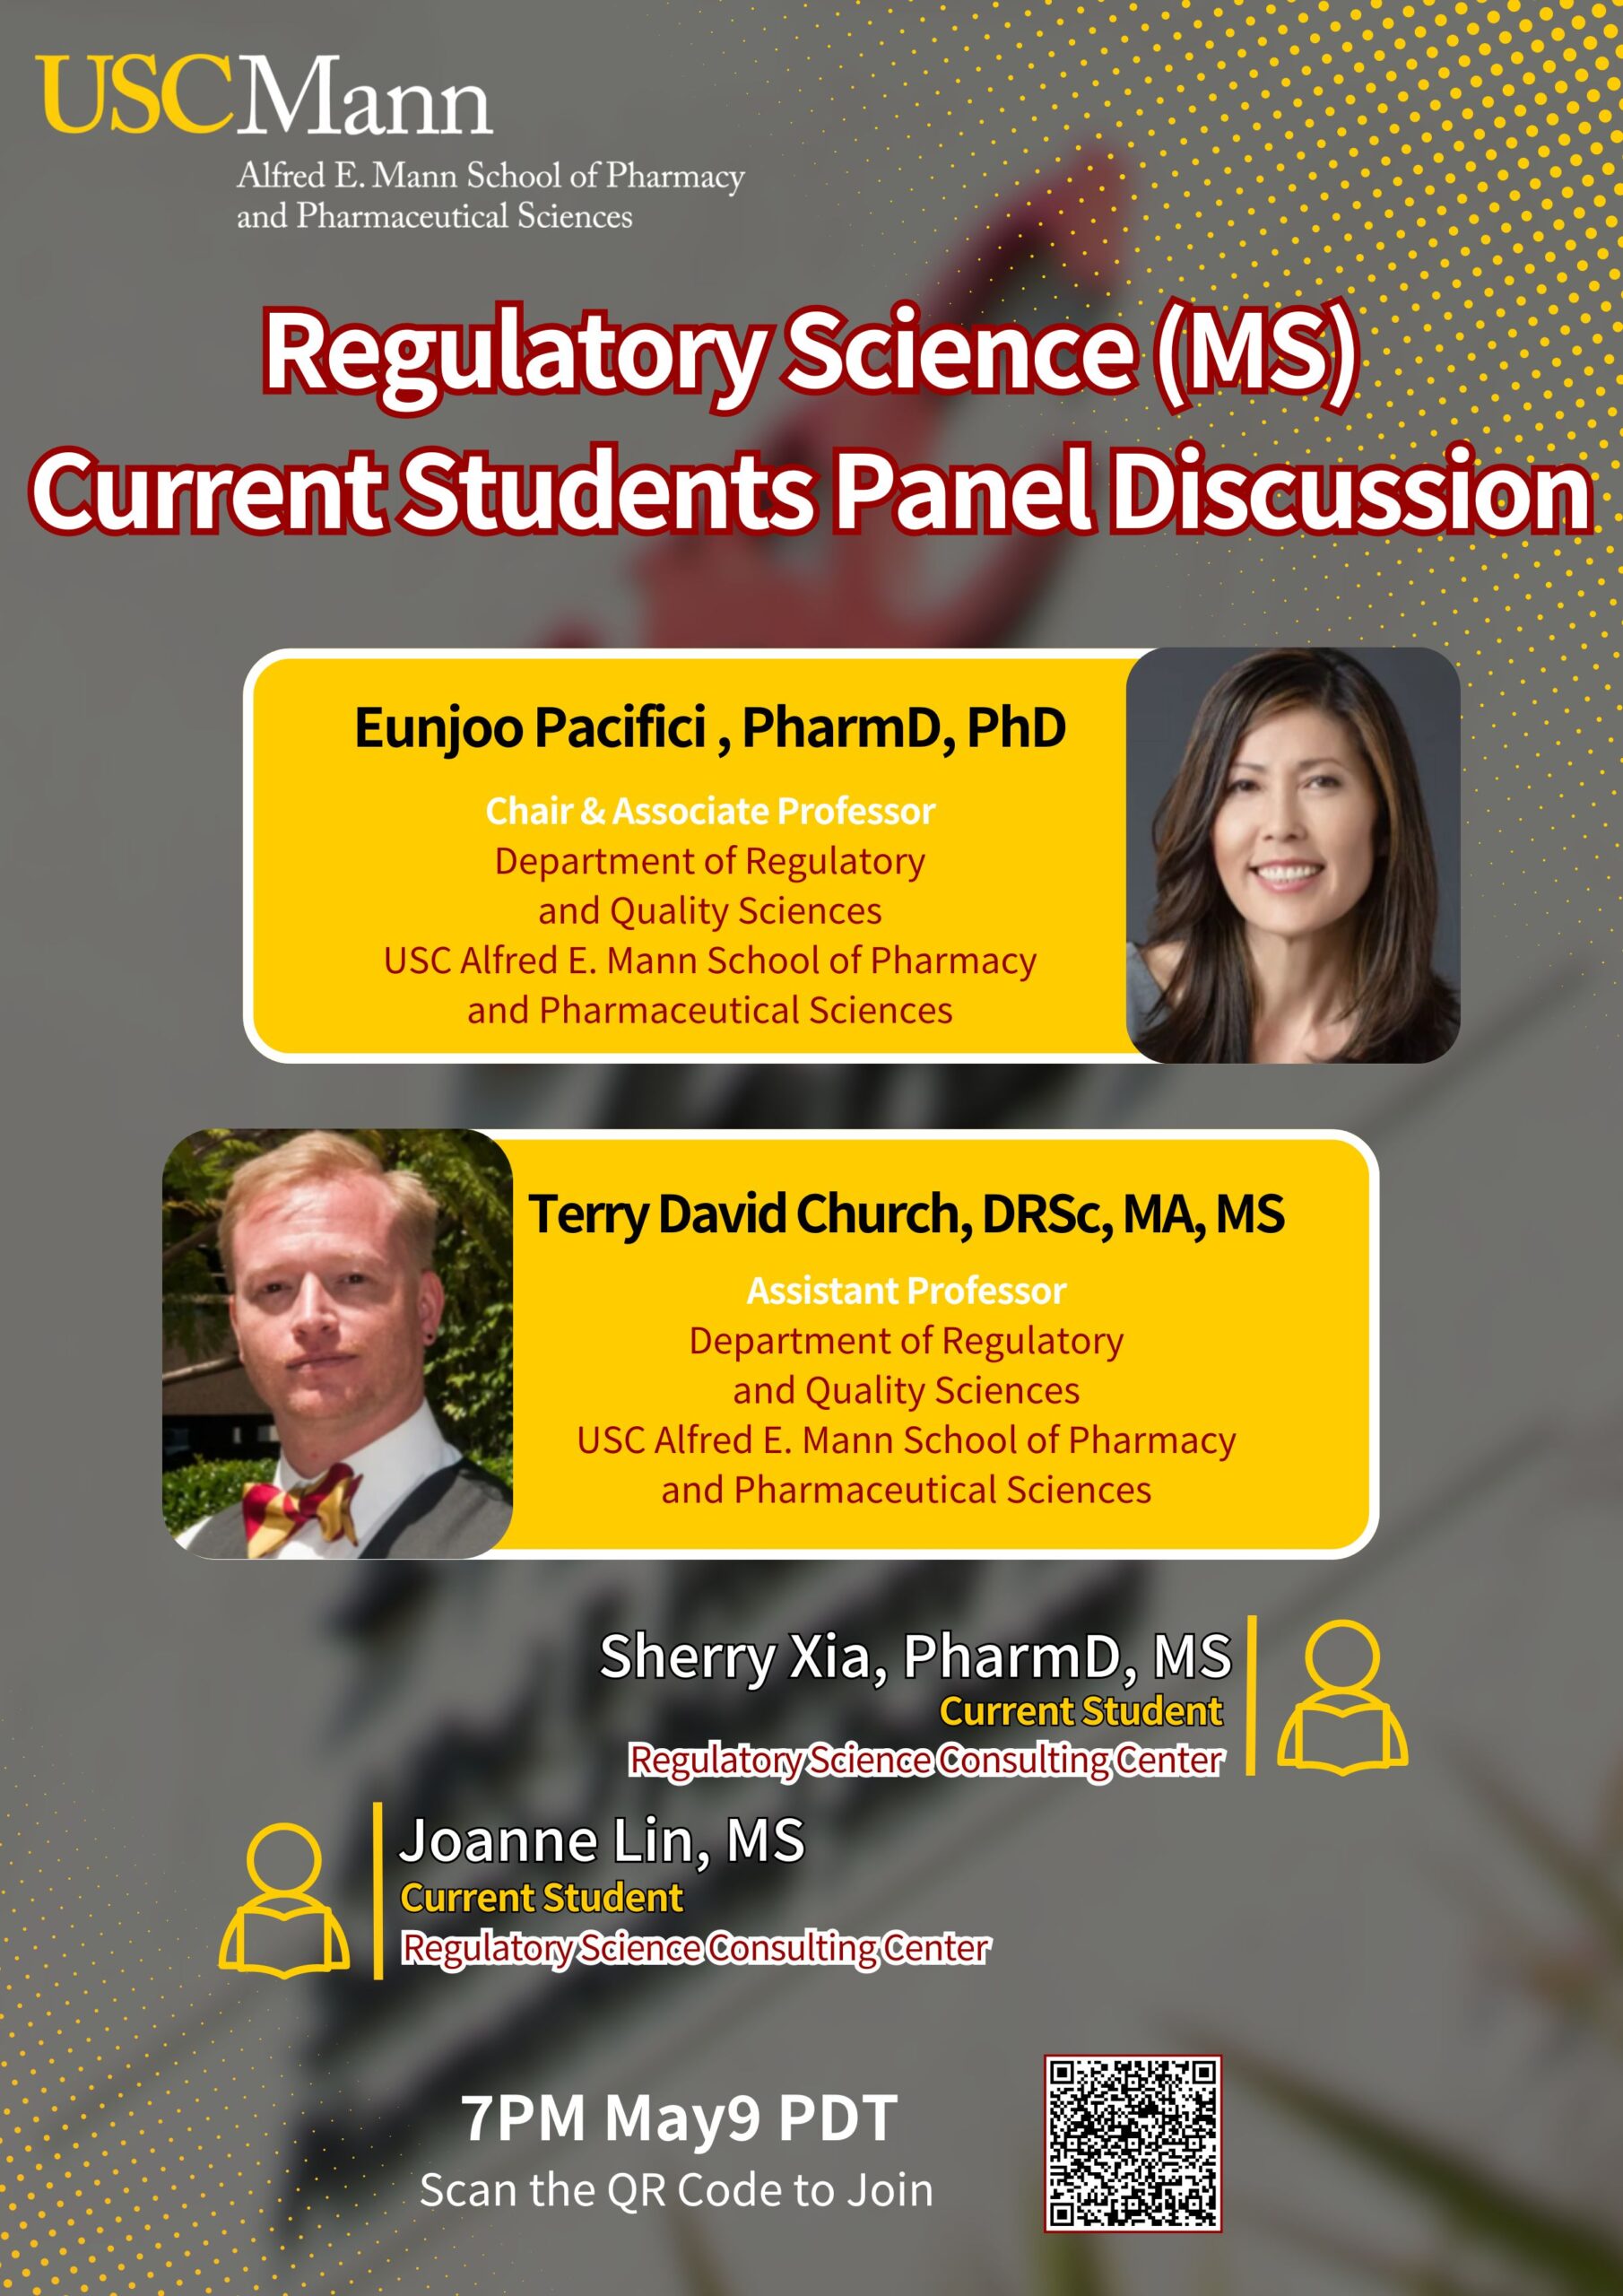 Regulatory Science (MS) Current Students Panel Discussion